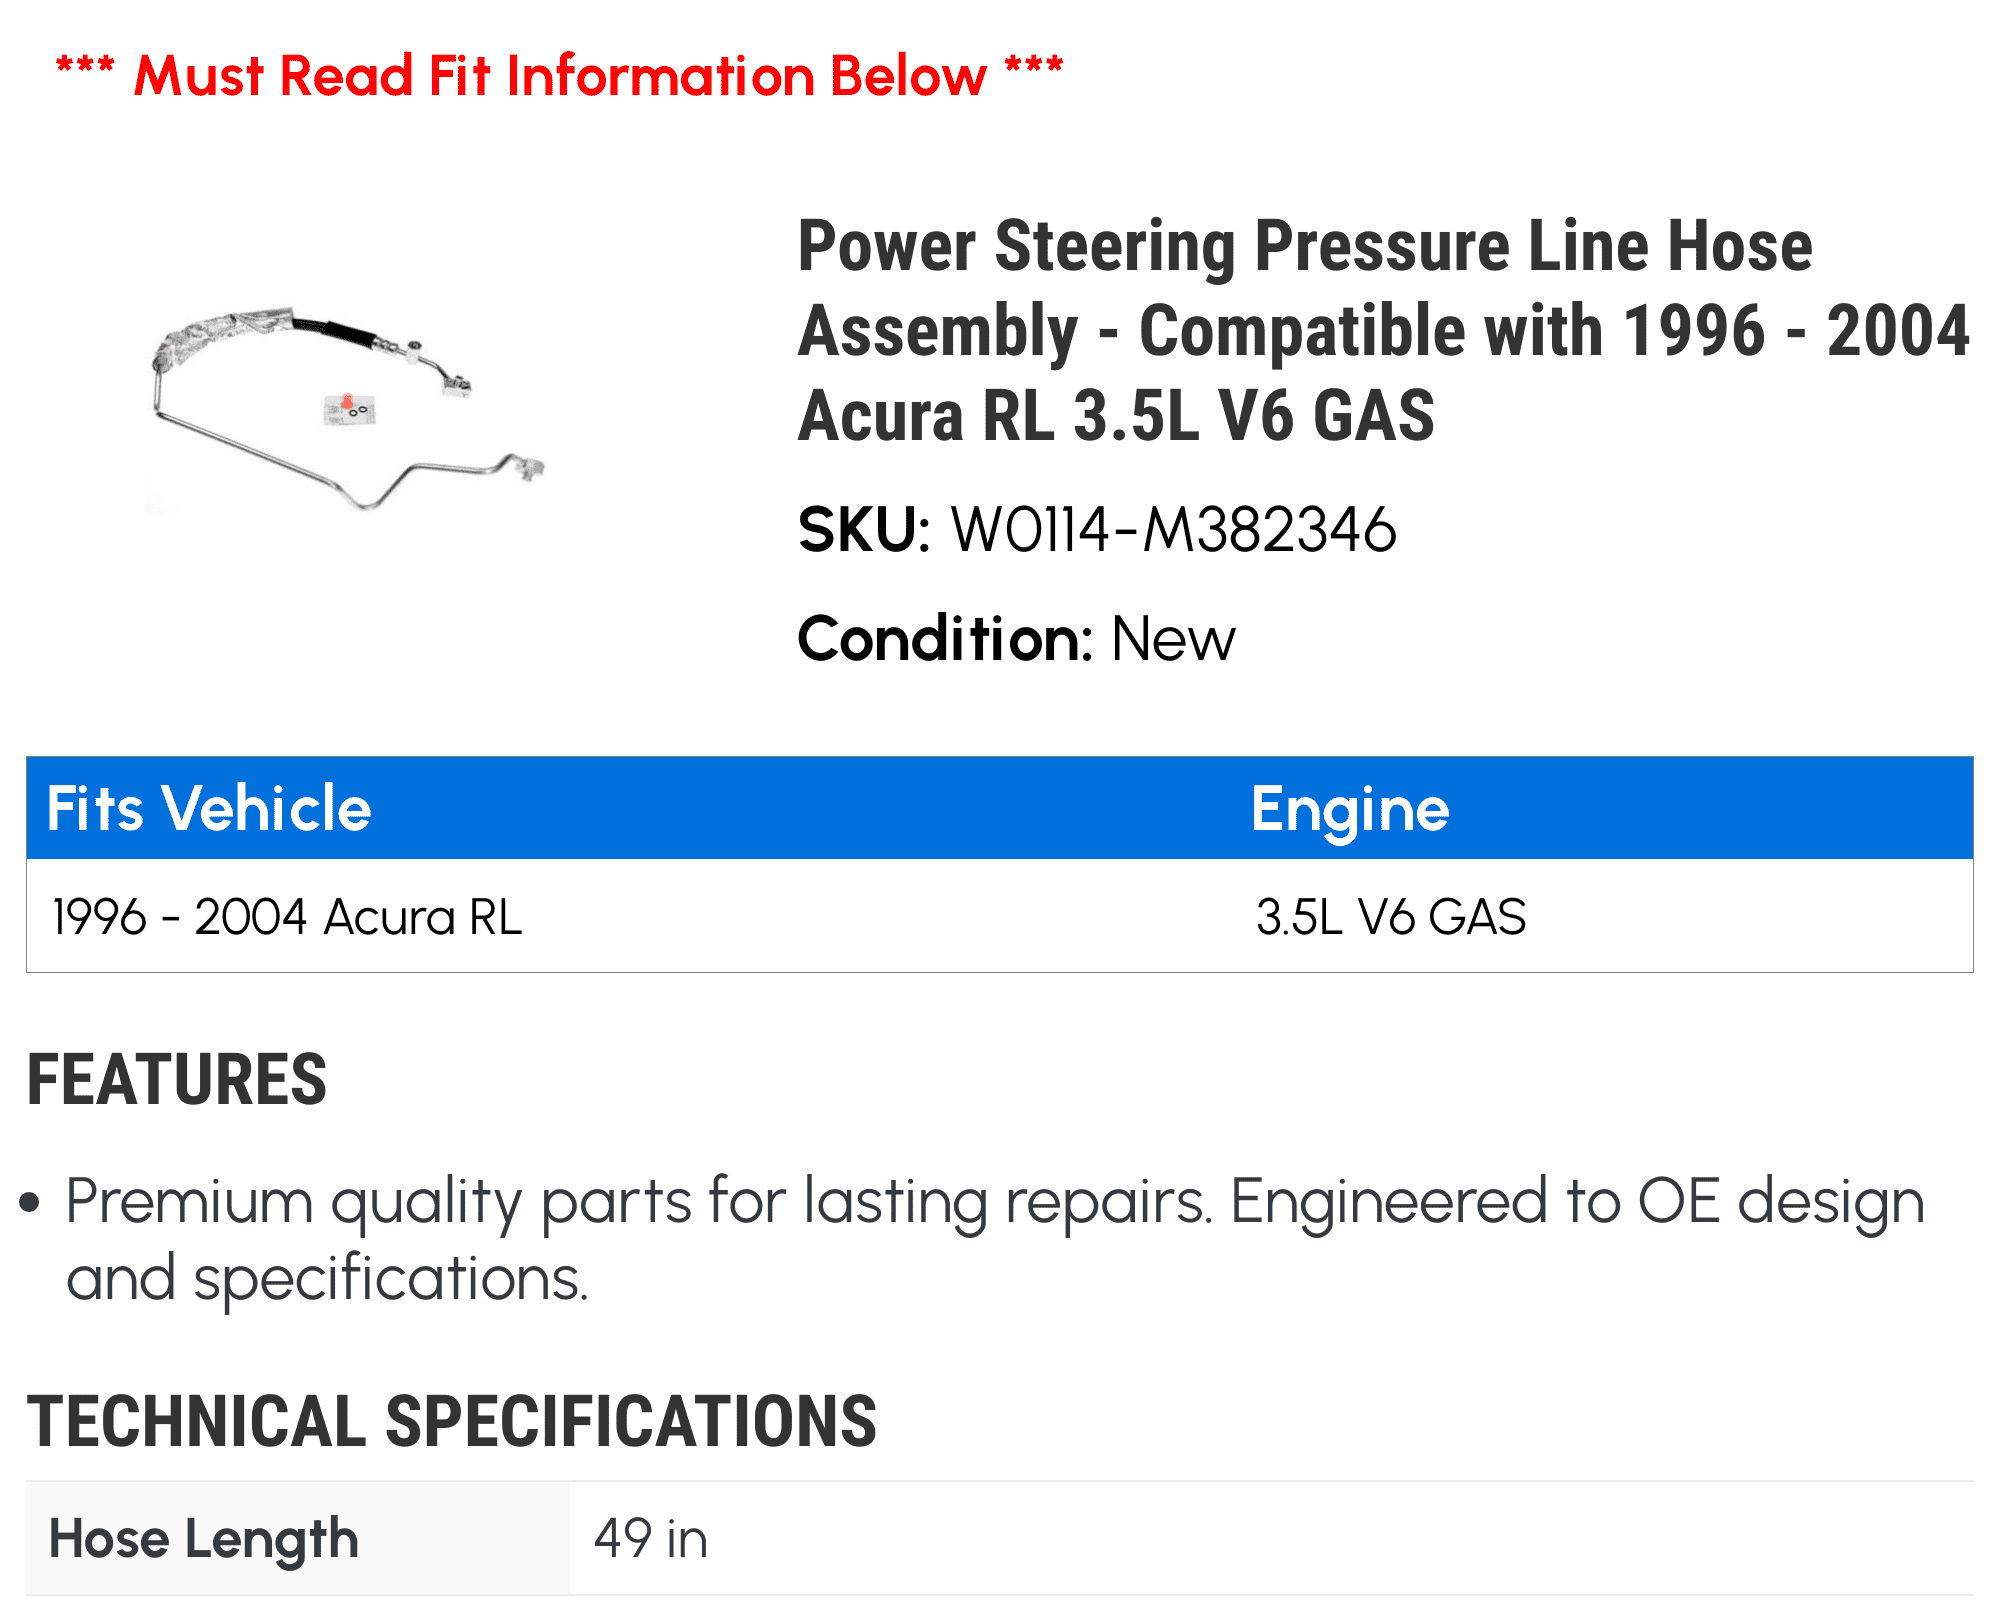 Power Steering Pressure Line Hose Assembly Compatible with 1996-2004 Acura RL 3.5L V6 GAS 